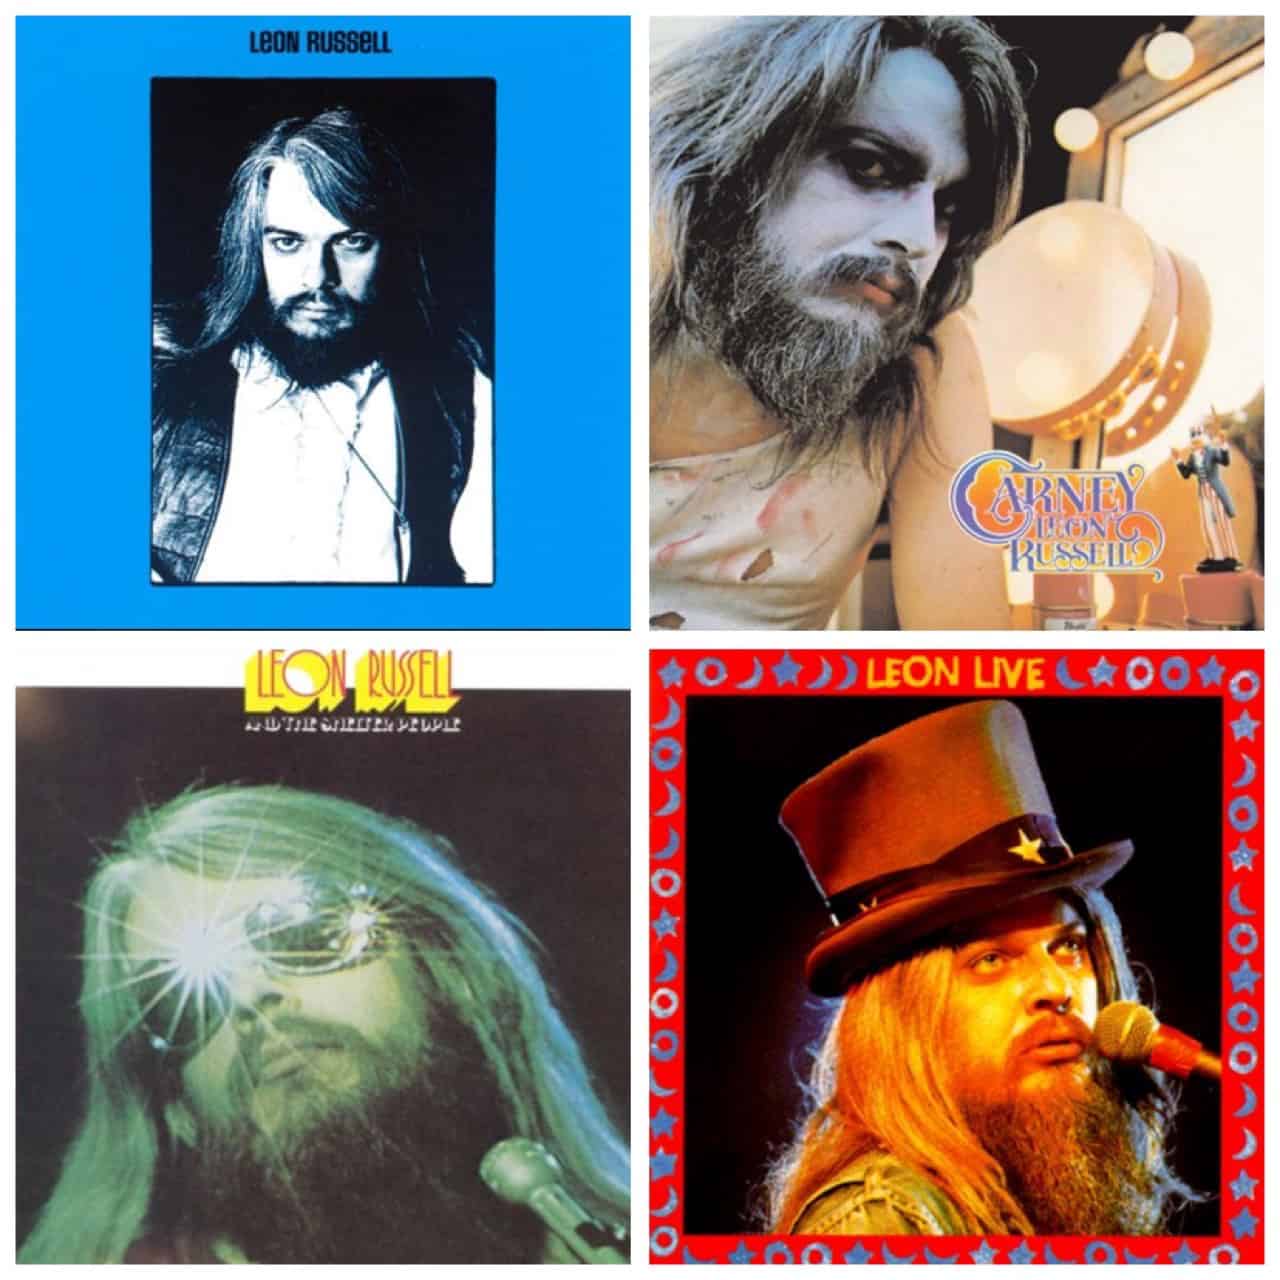 Cover artwork of Leon Russell’s early solo albums.